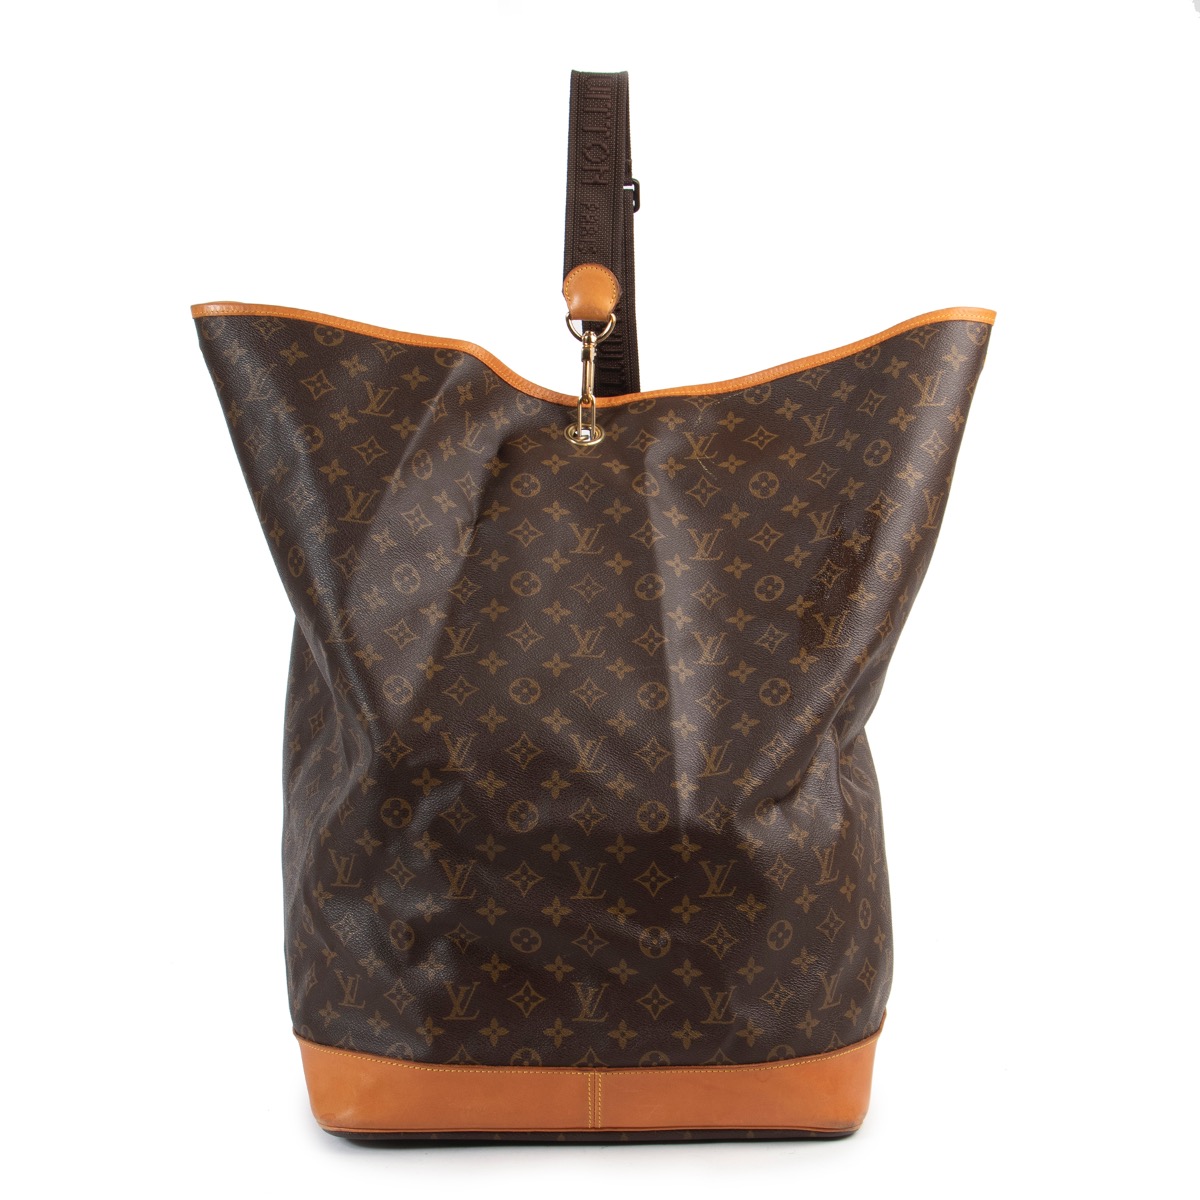 Louis Vuitton Marin - Travel Bag second hand prices